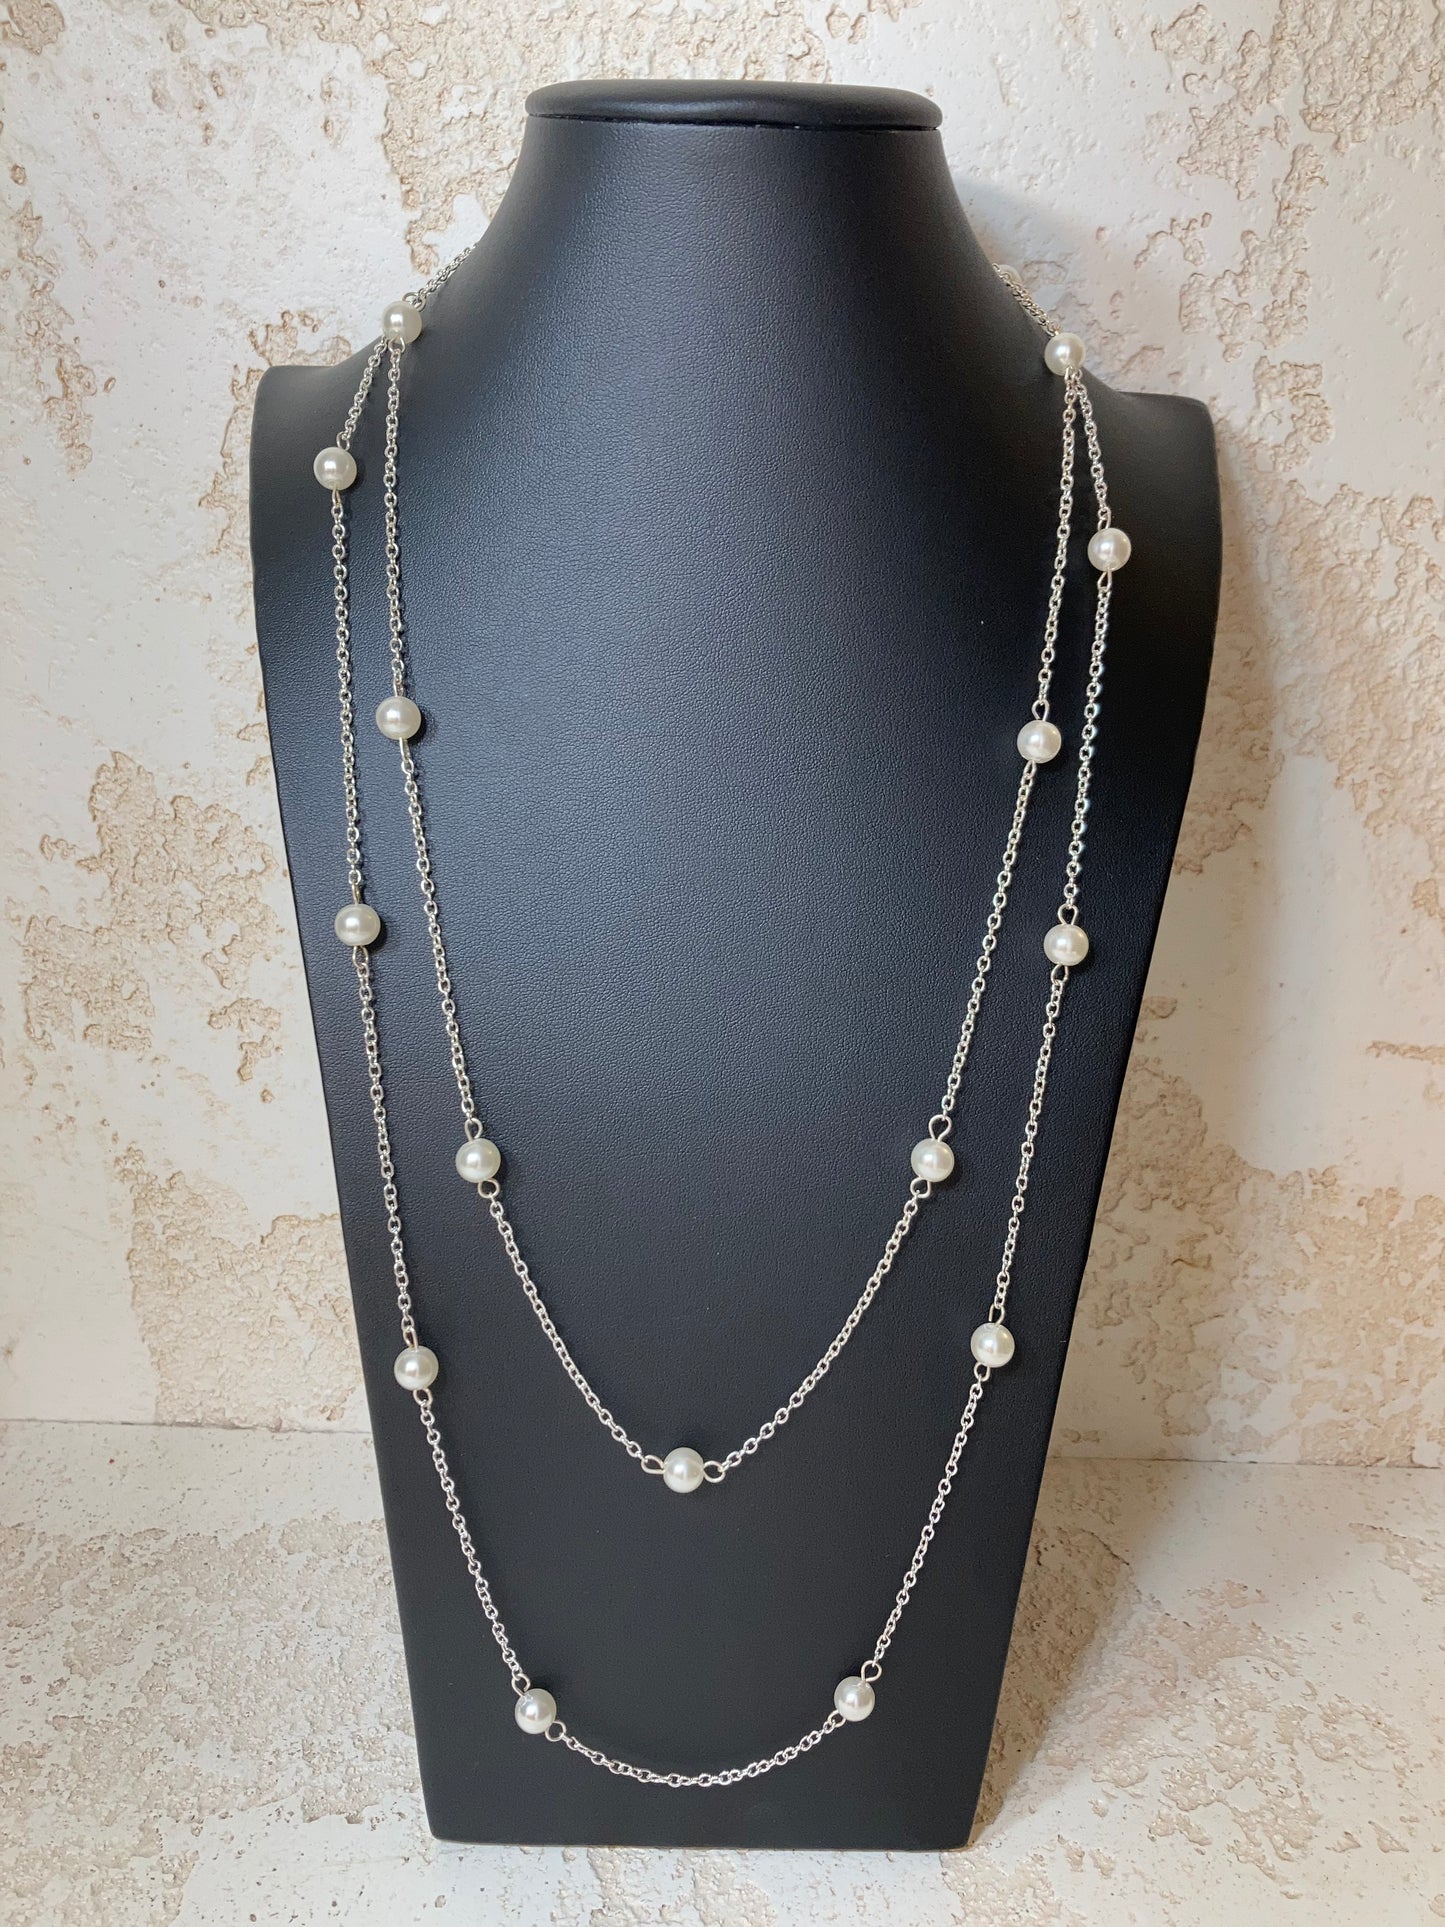 Pearls and Chain Necklace